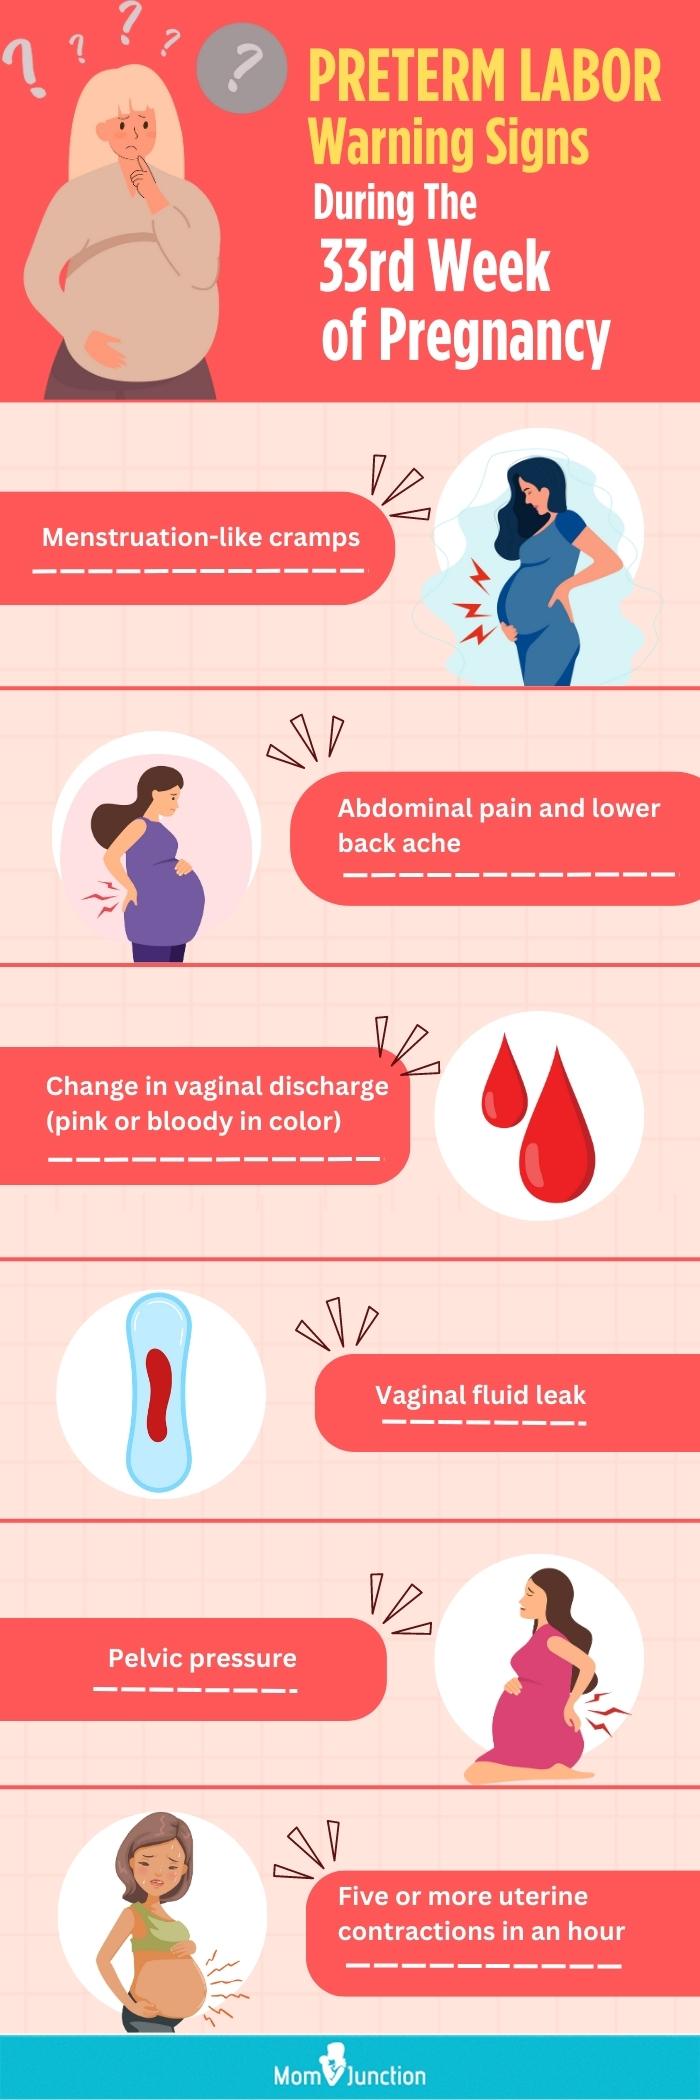 preterm labor warning signs during the 33rd week of pregnancy (infographic)